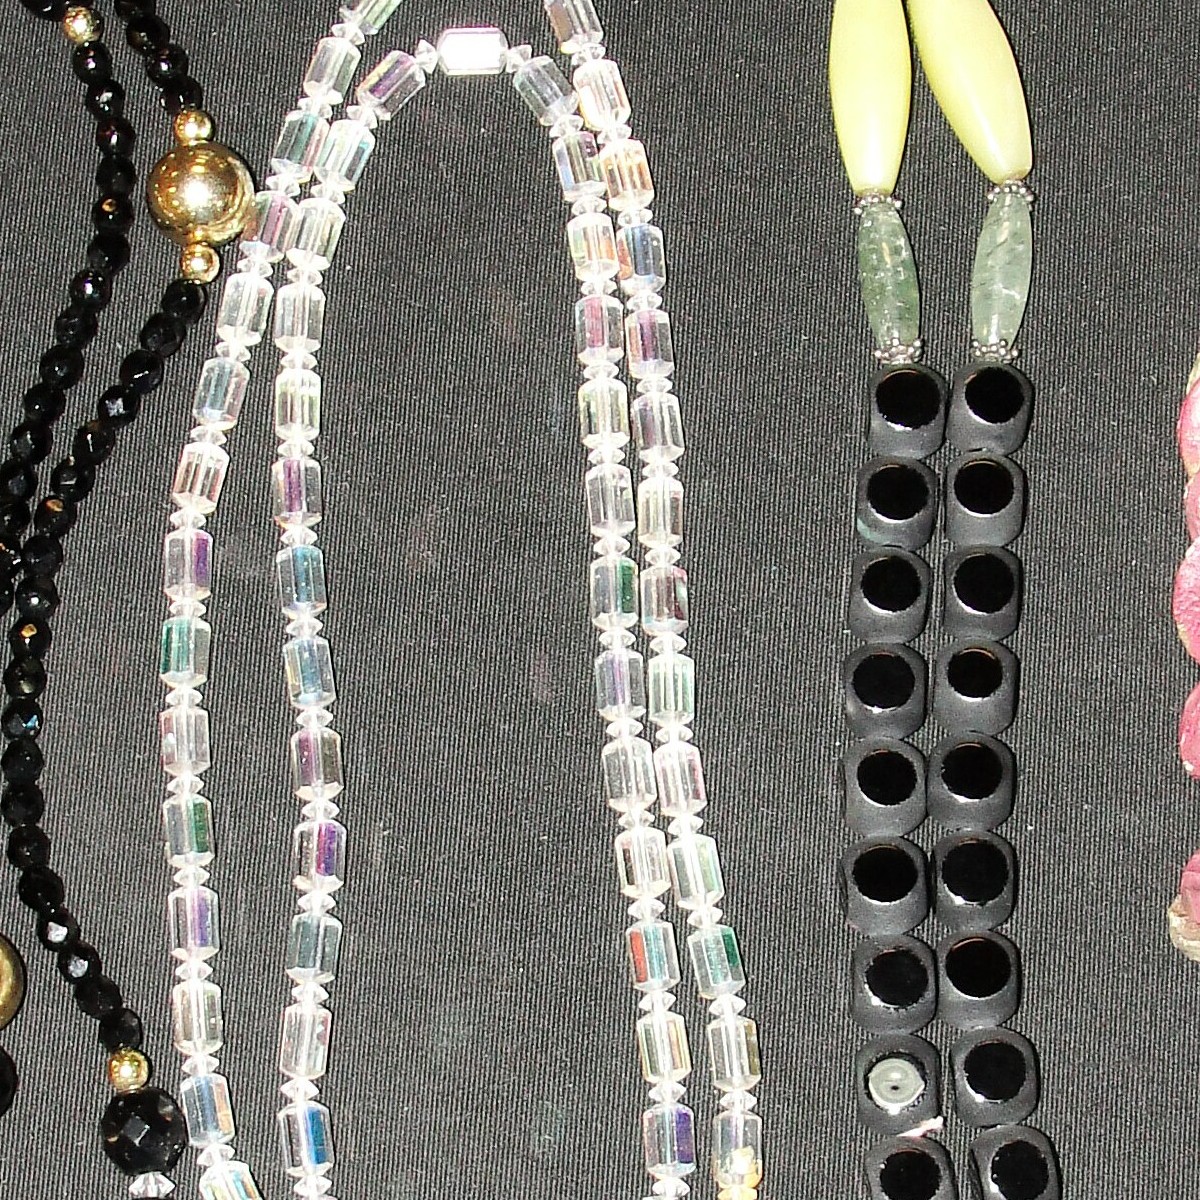 Eleven (11) Piece Lot Of Costume Jewelry Necklaces. Various sizes. Unsigned